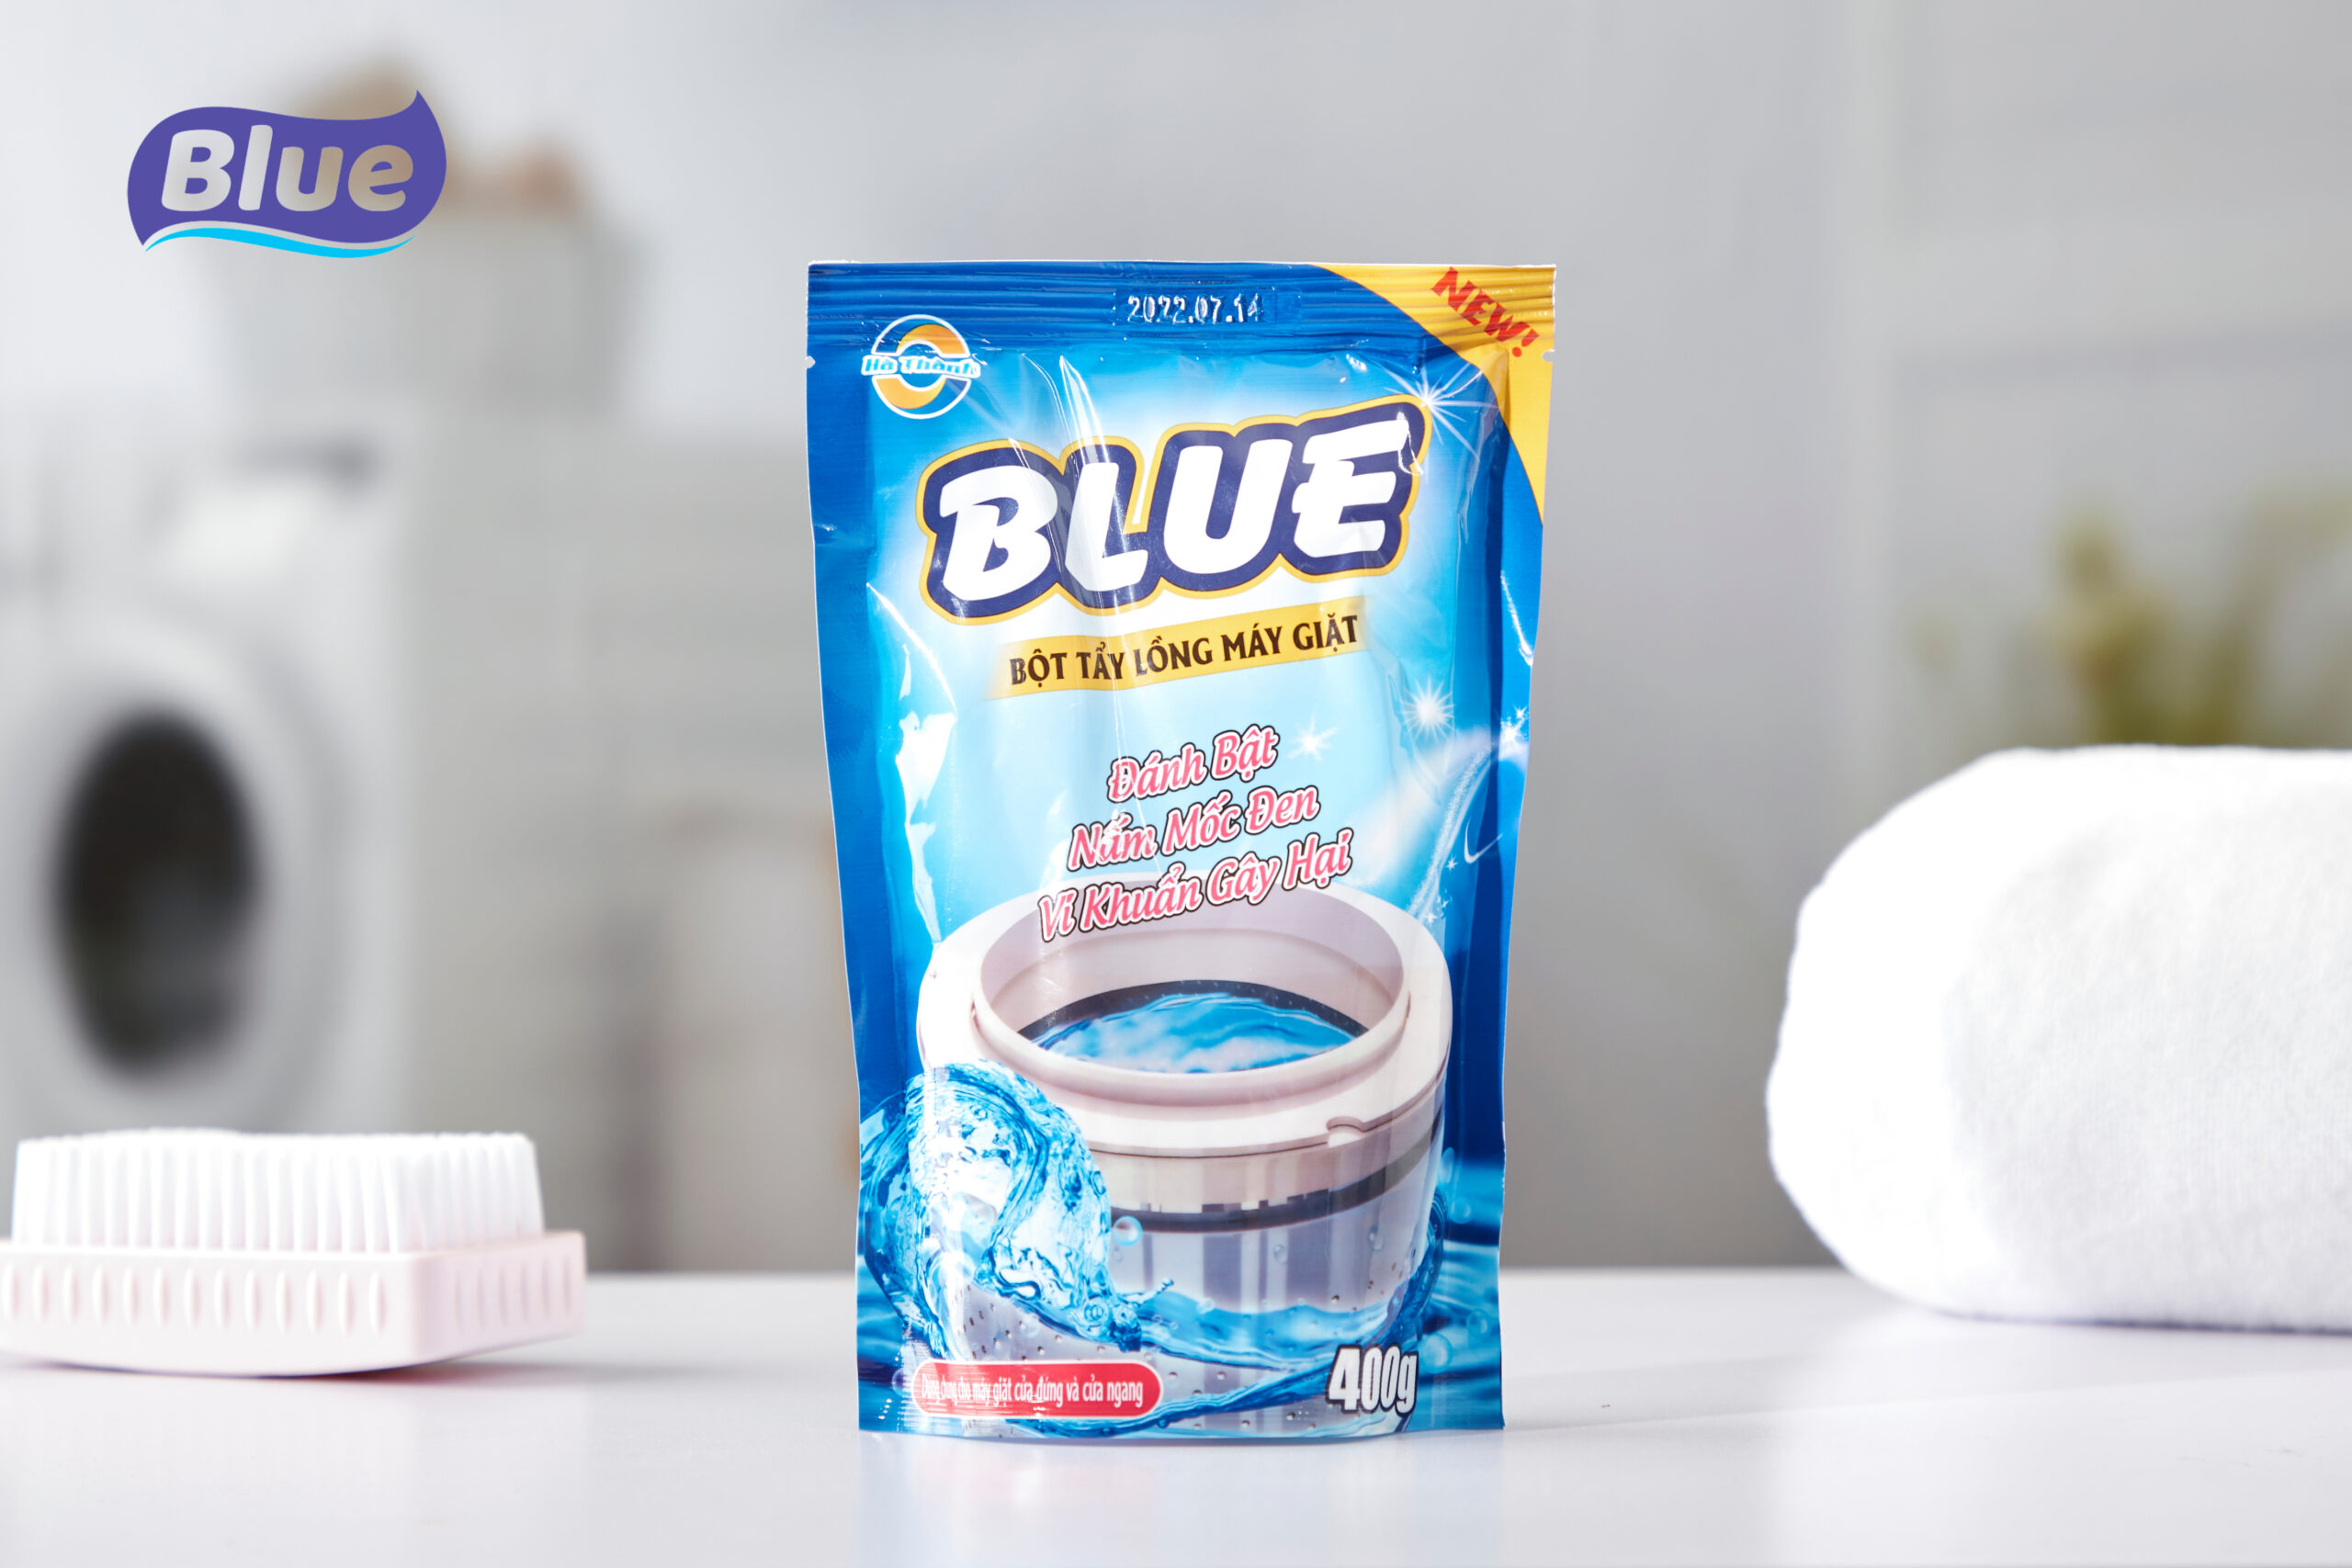 Bleach powder cage washer blue 400g import company ha finished